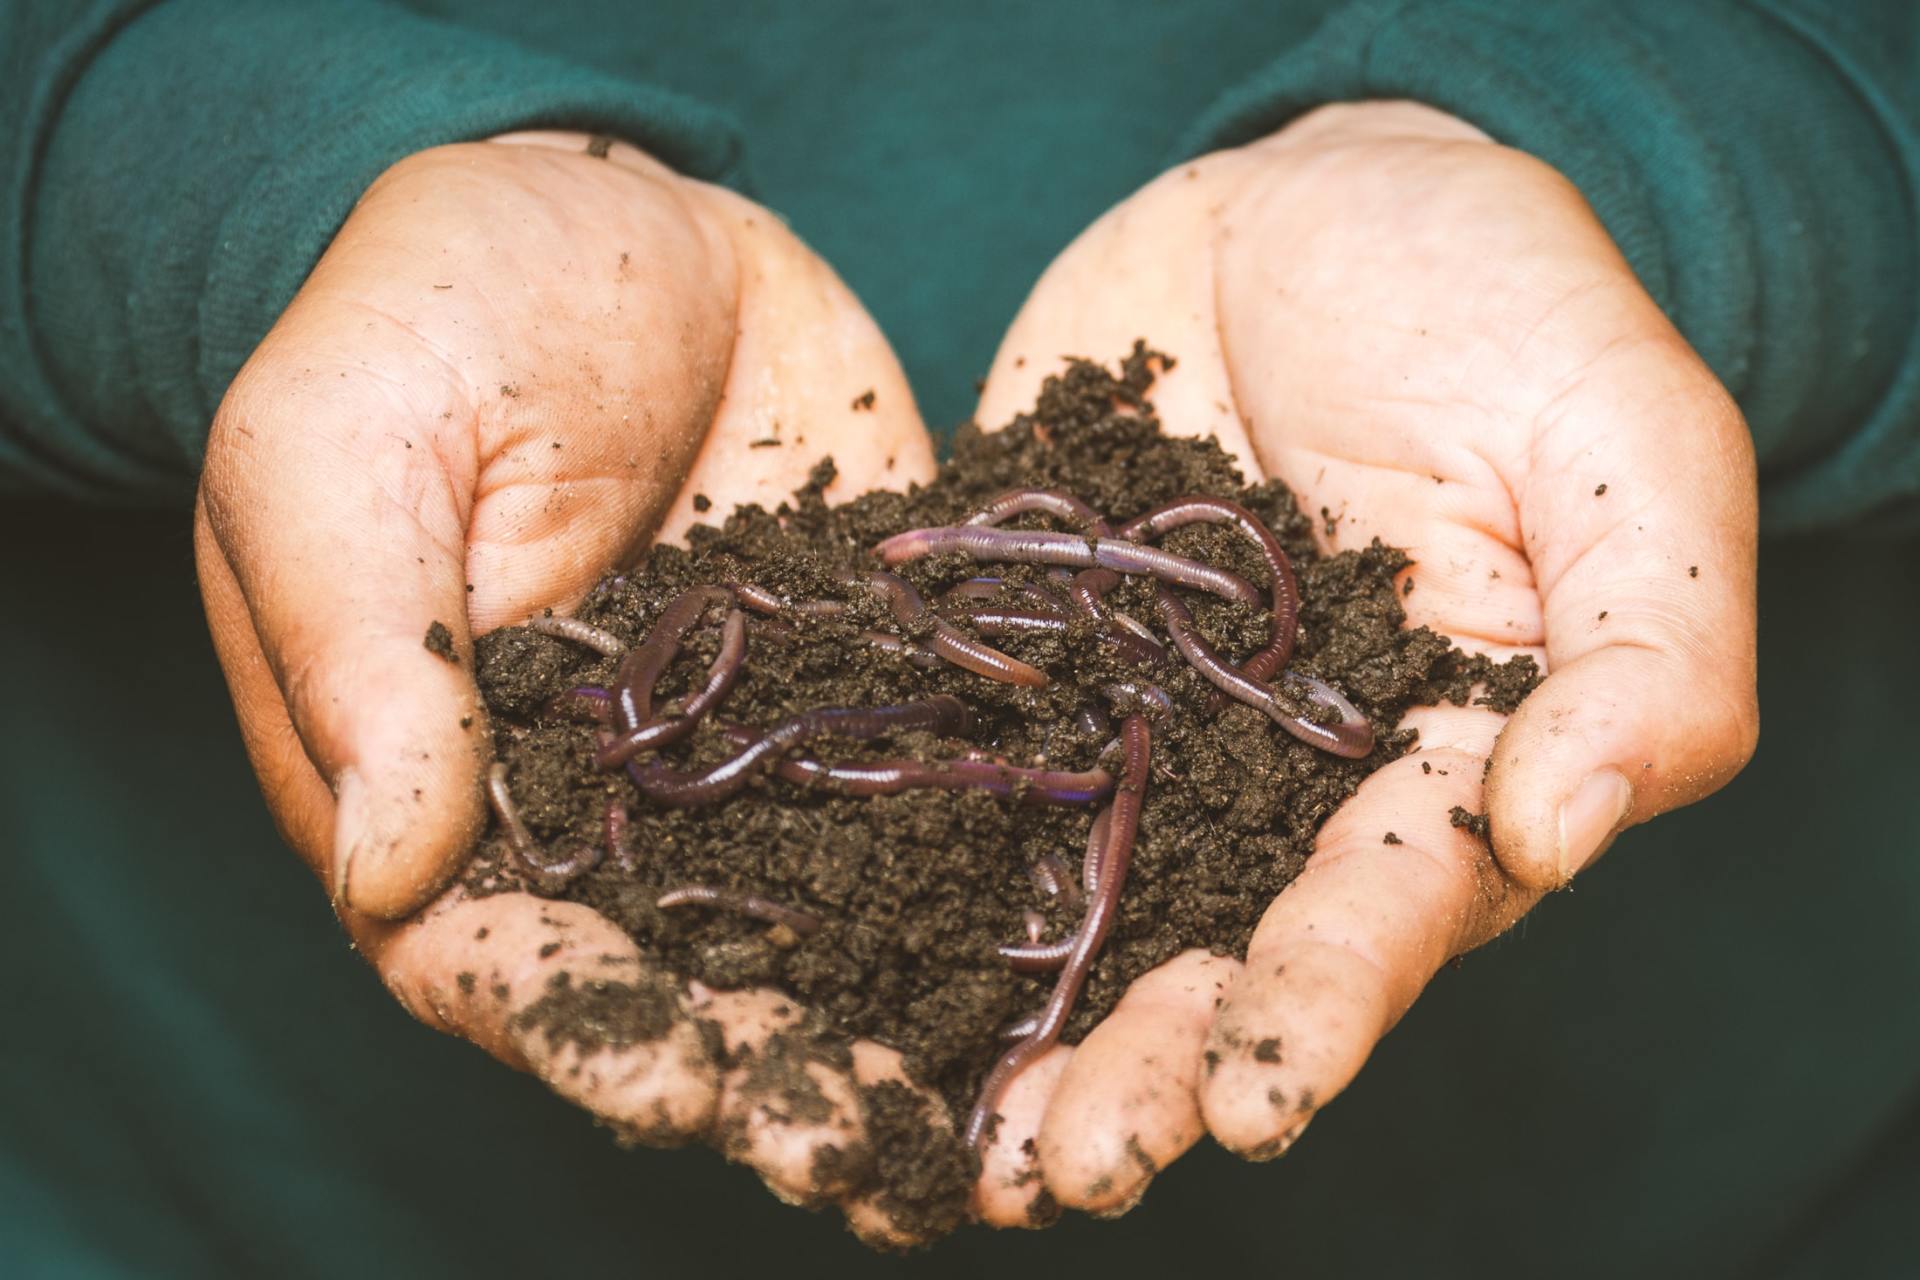 a person is holding a pile of worms in their hands